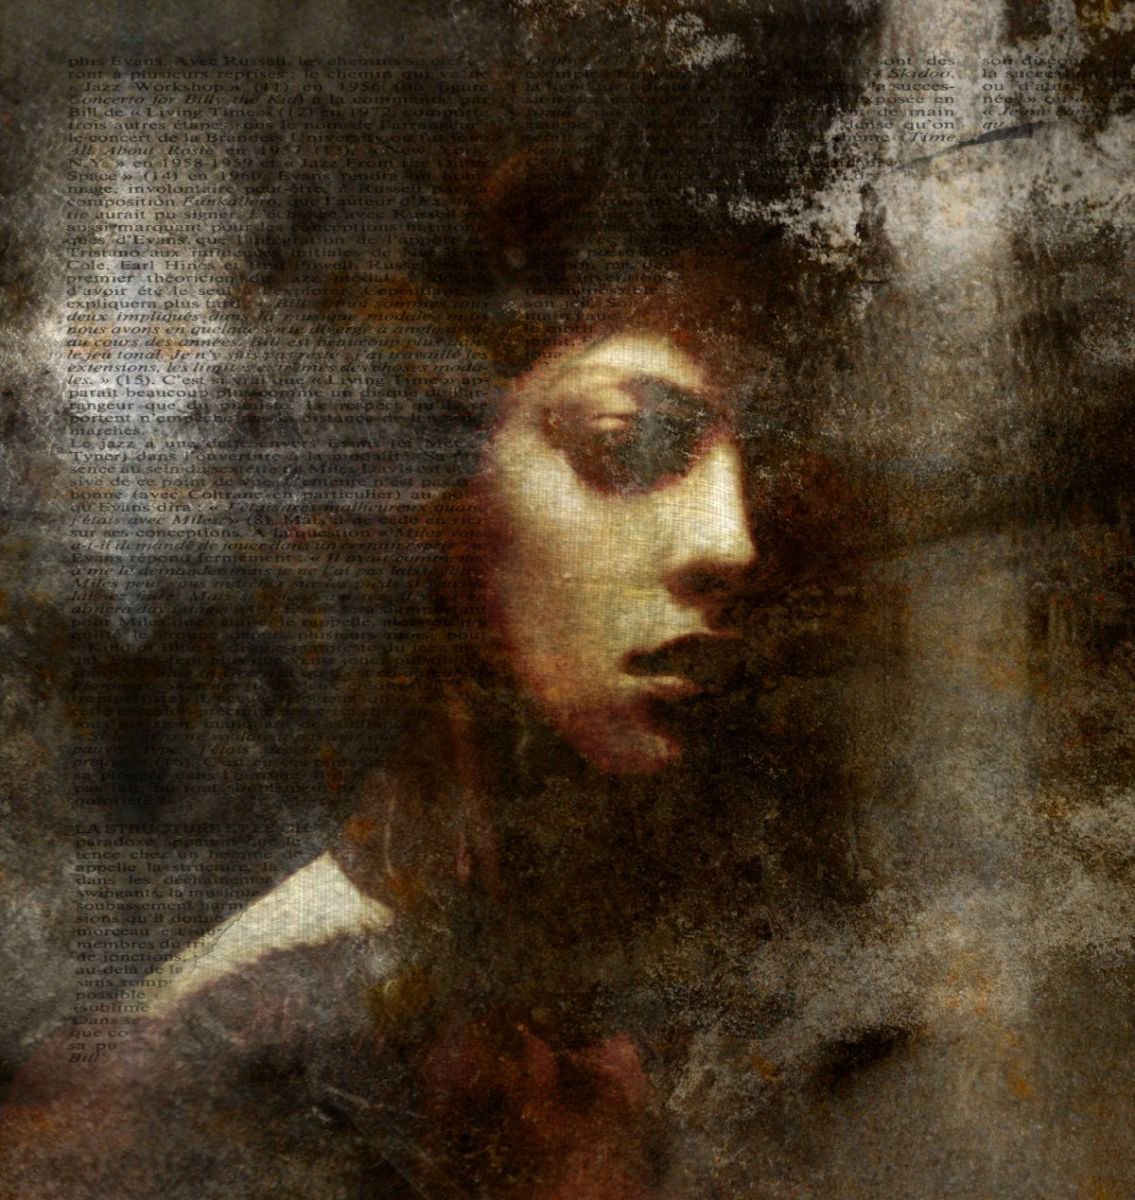 CLOSER by Philippe berthier